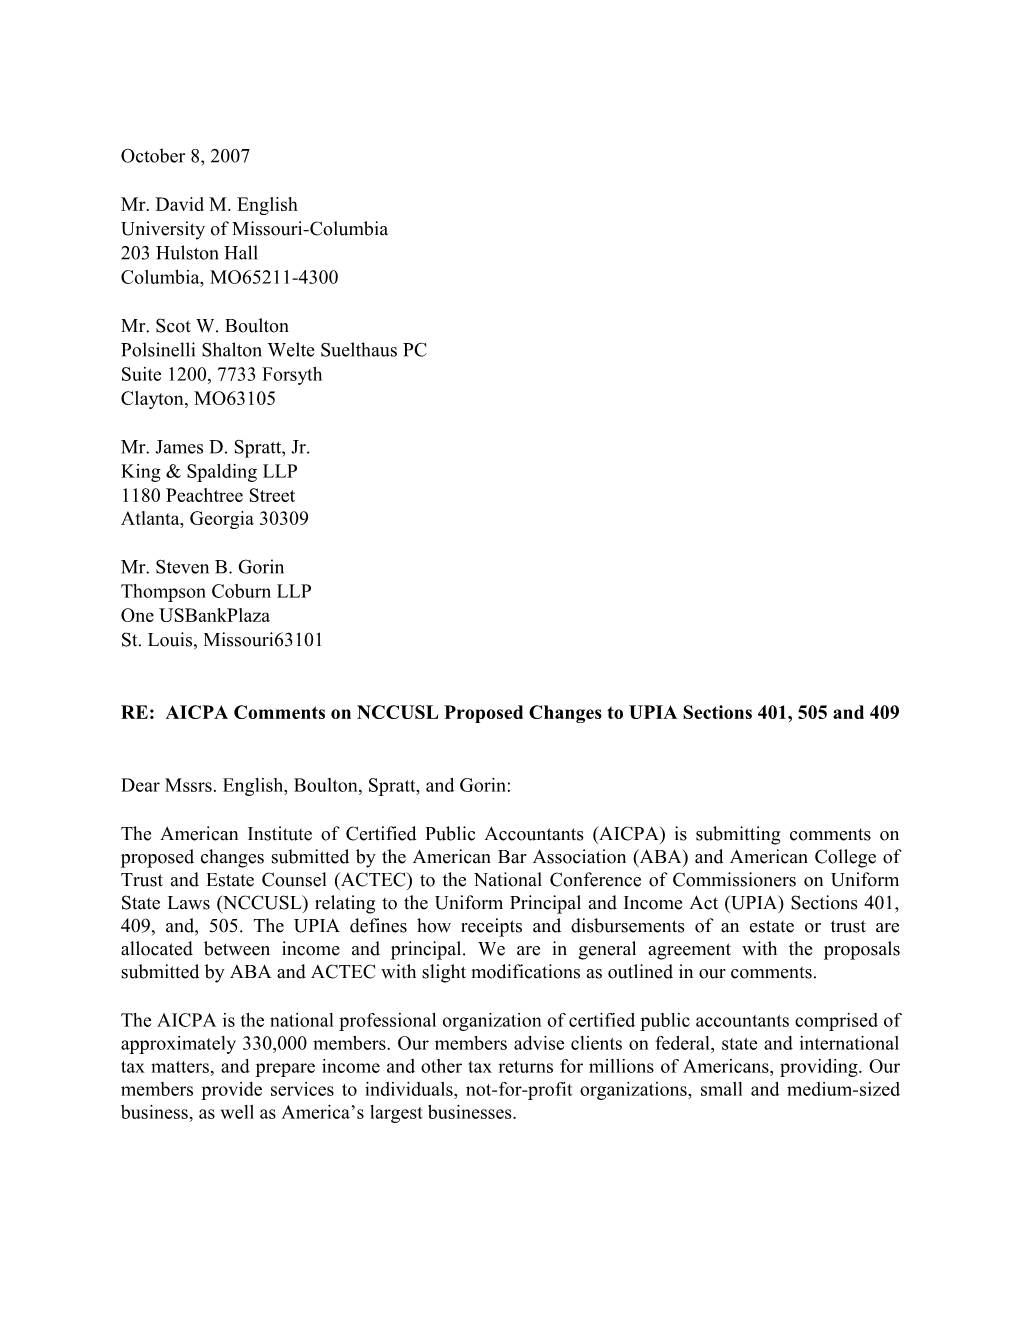 AICPA Comments To NCCUSL On Proposed Changes To UPIA Section 401, 409, And 505 - Oct. 3, 2007